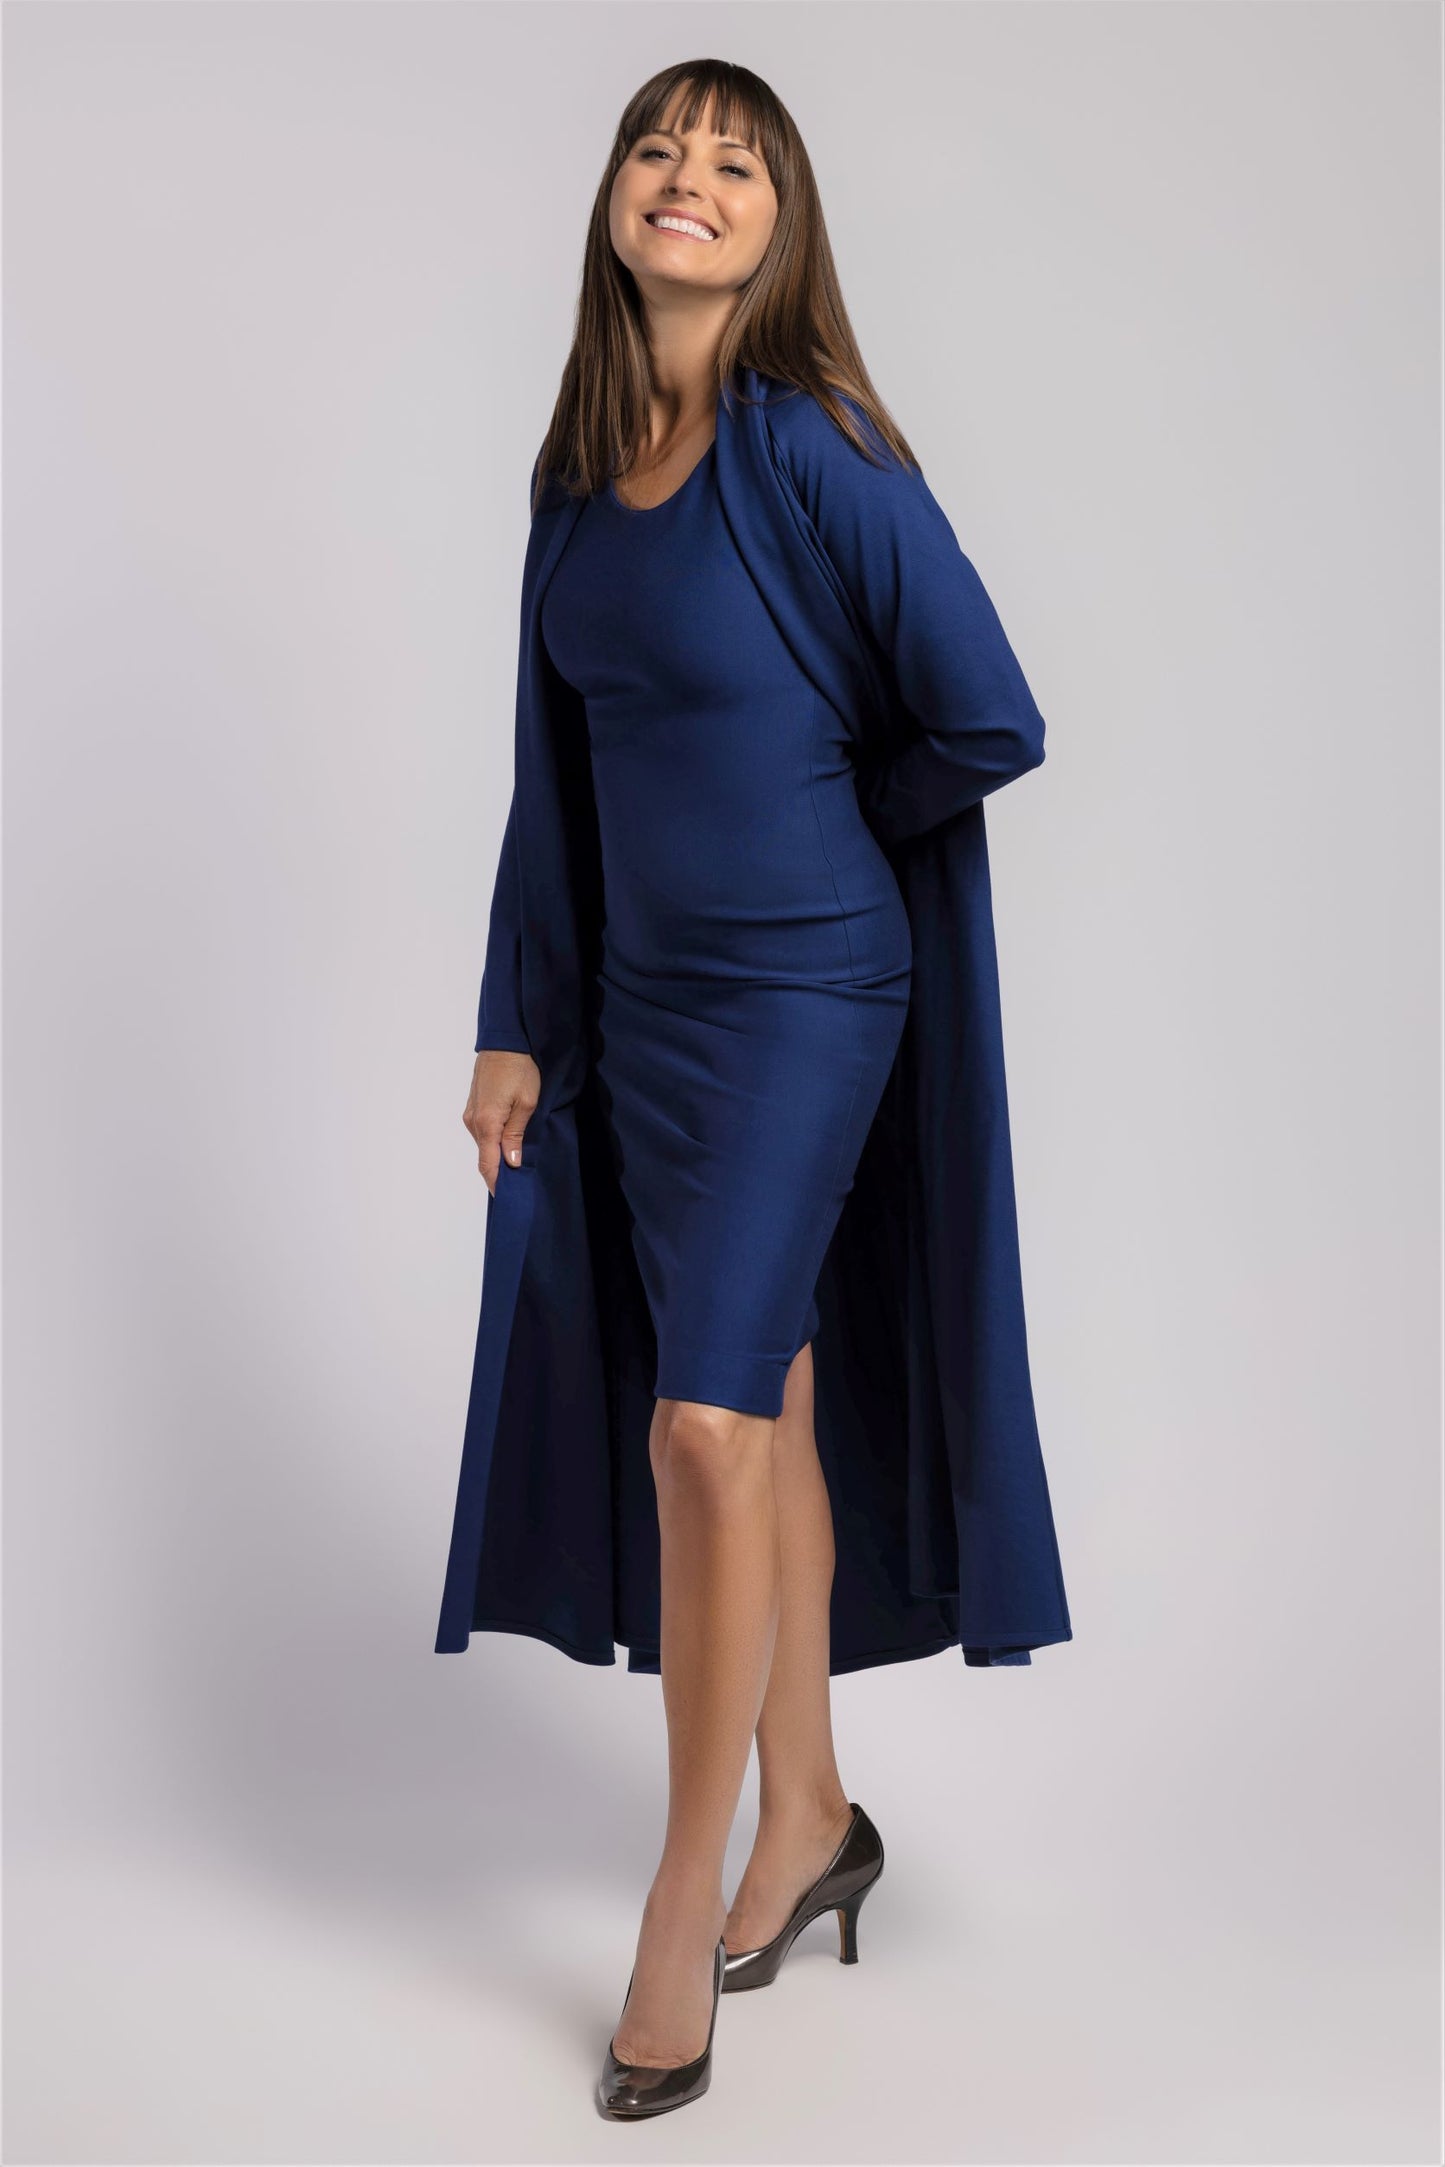 Sacred Cobalt little BLUE Dress- WITH the Time Travelers' Coat in Sapphire